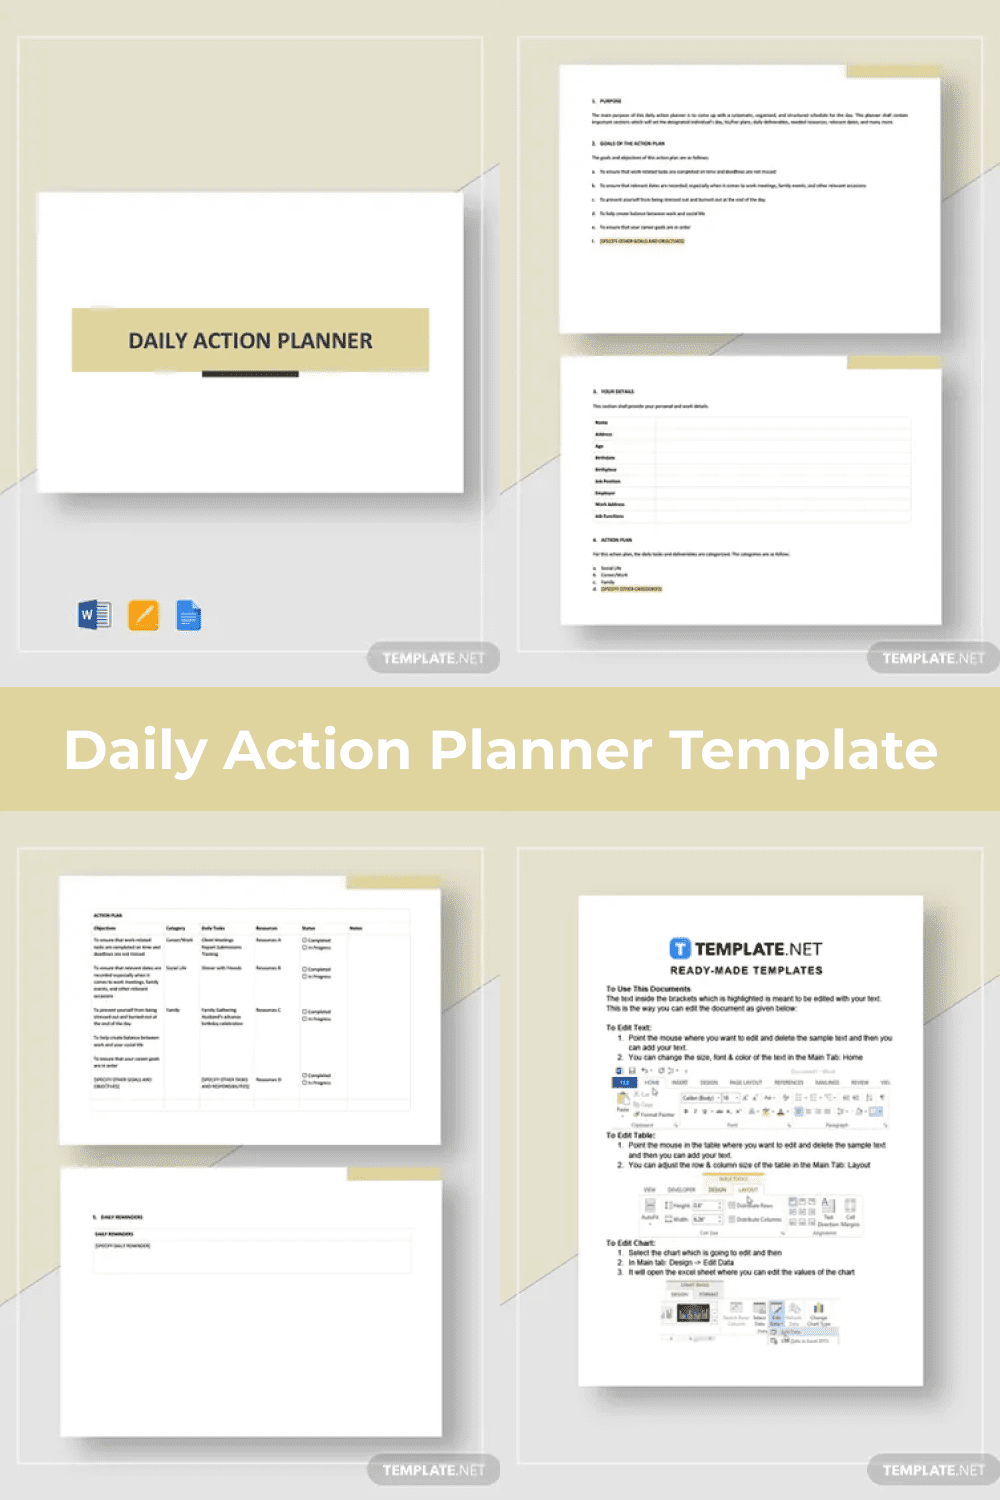 Detailed daily activity planner.